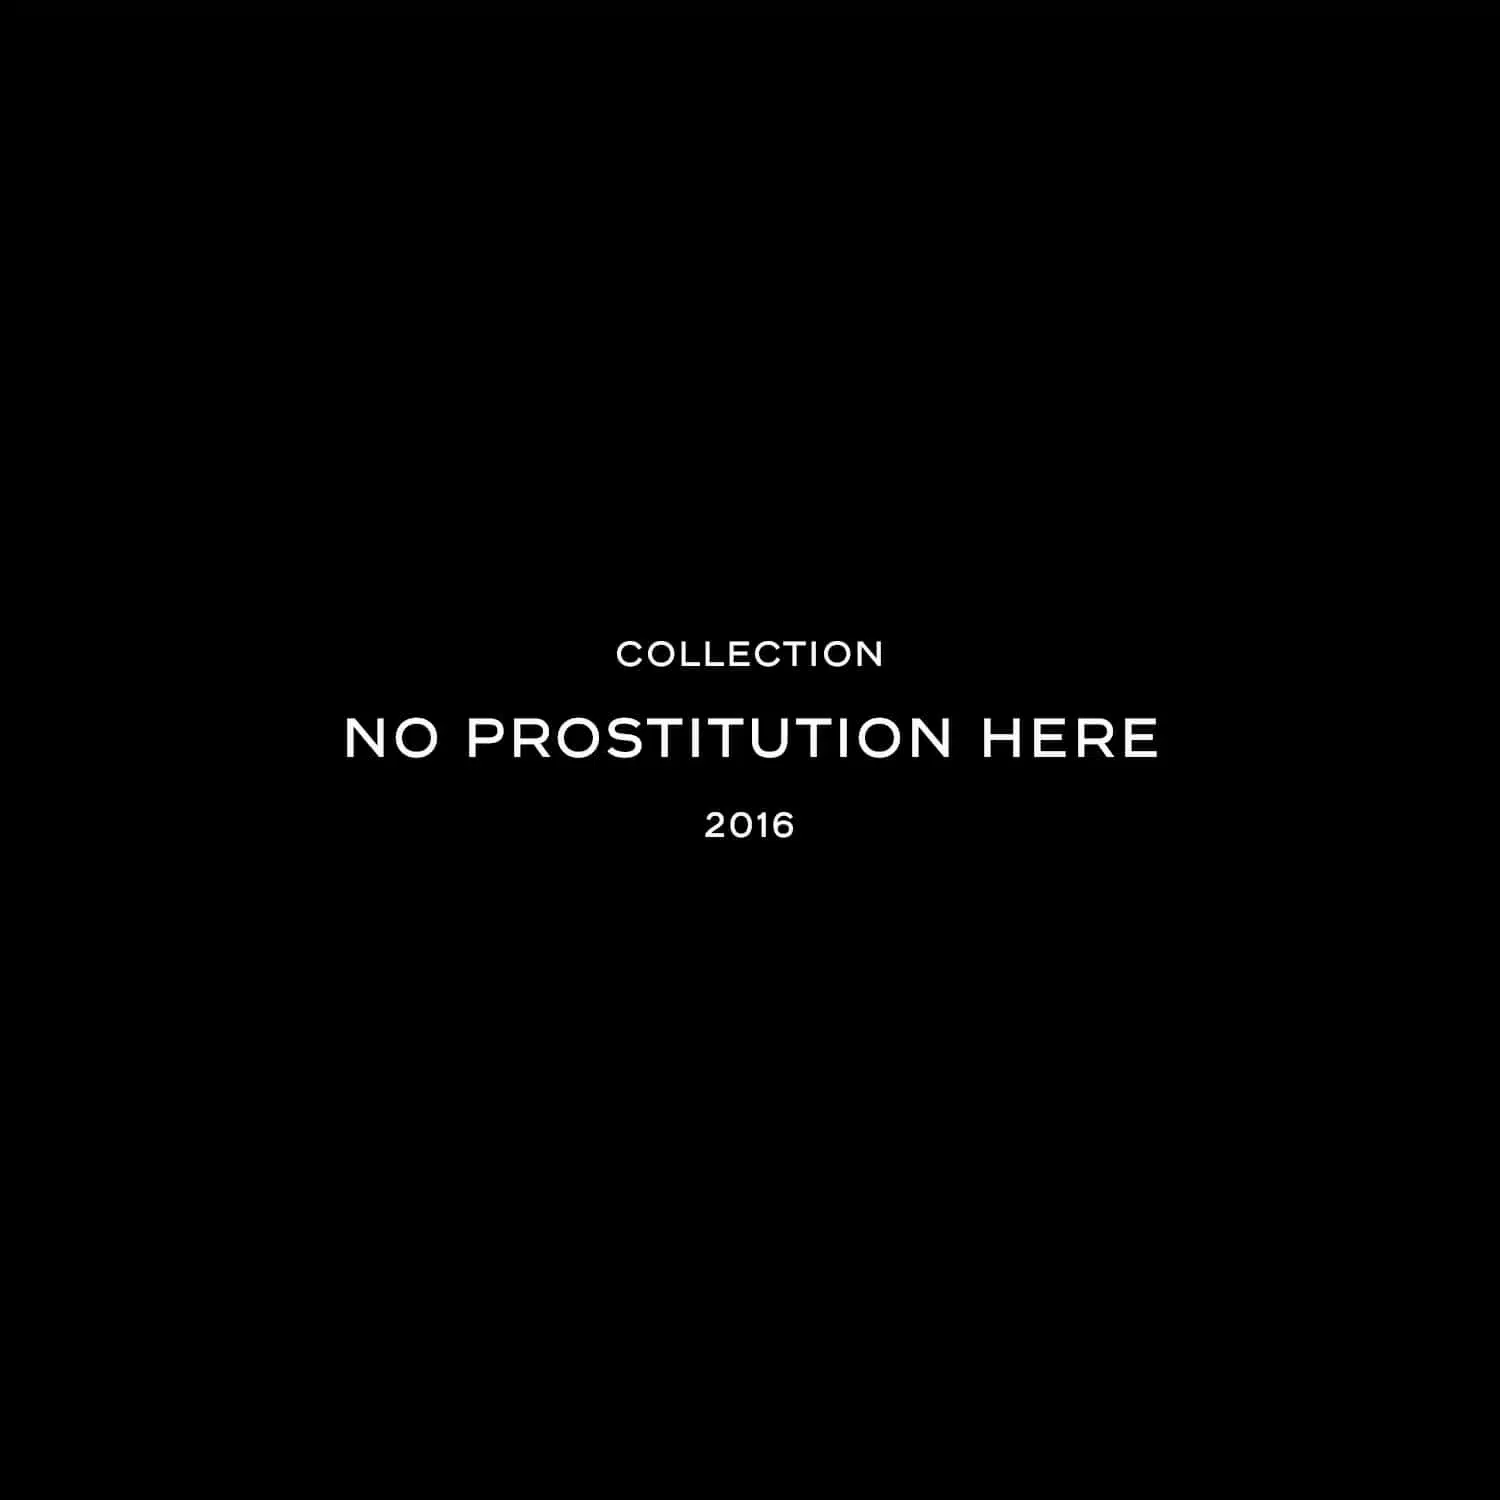 No prostitution here